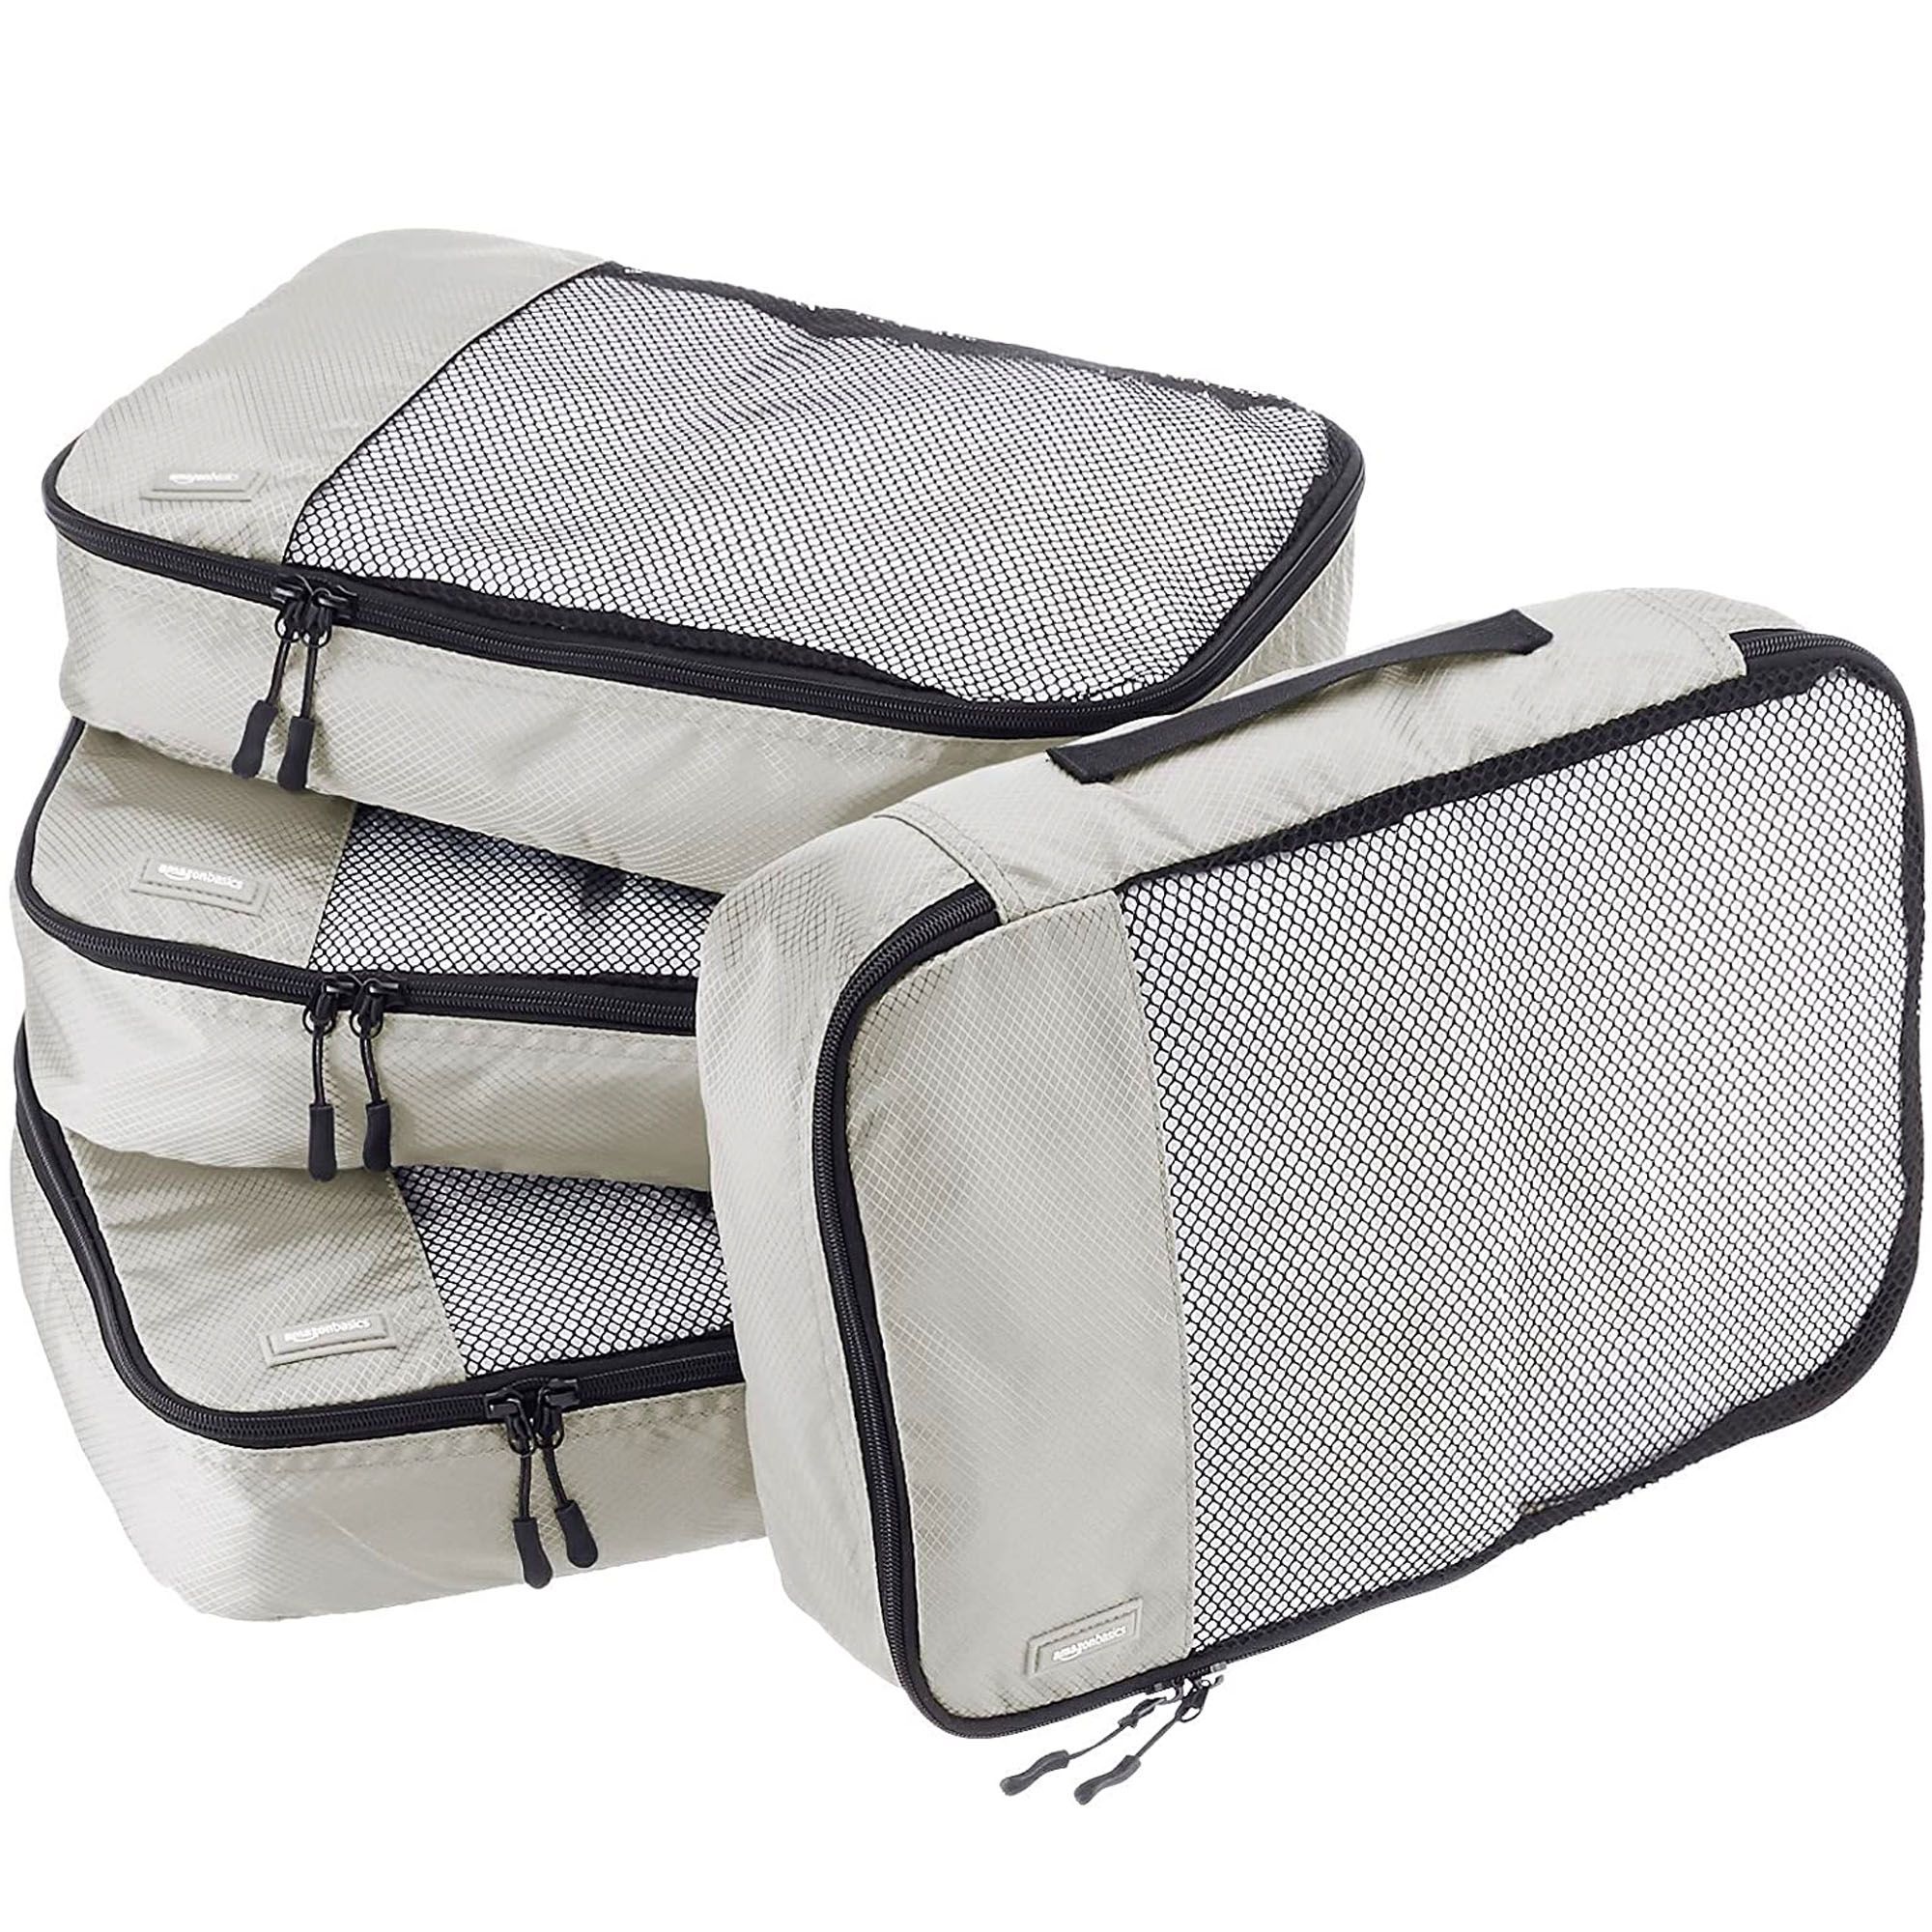 4-Piece Packing Travel Cubes